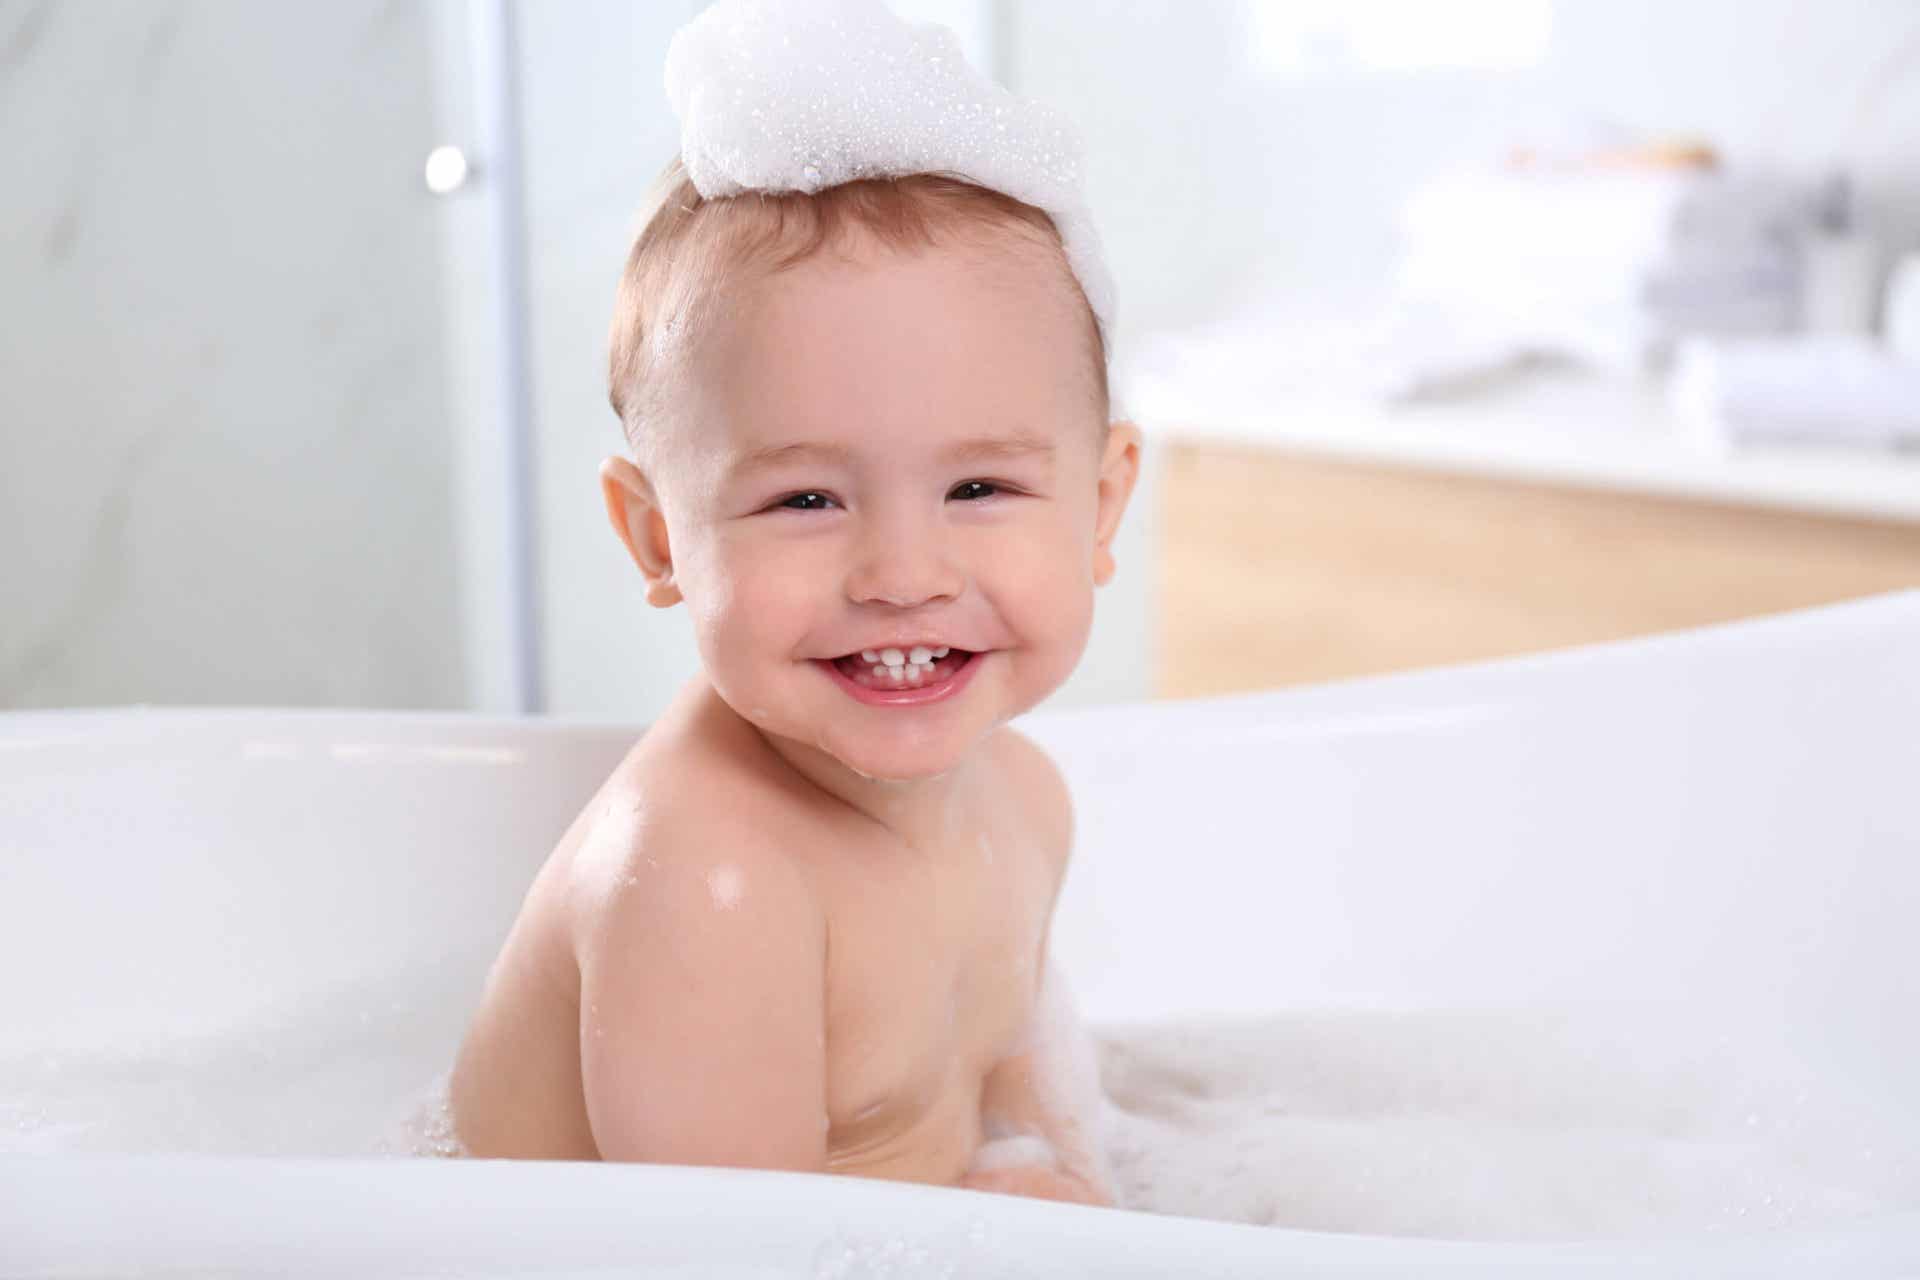 risks for babies in the bathroom: a baby in a bath